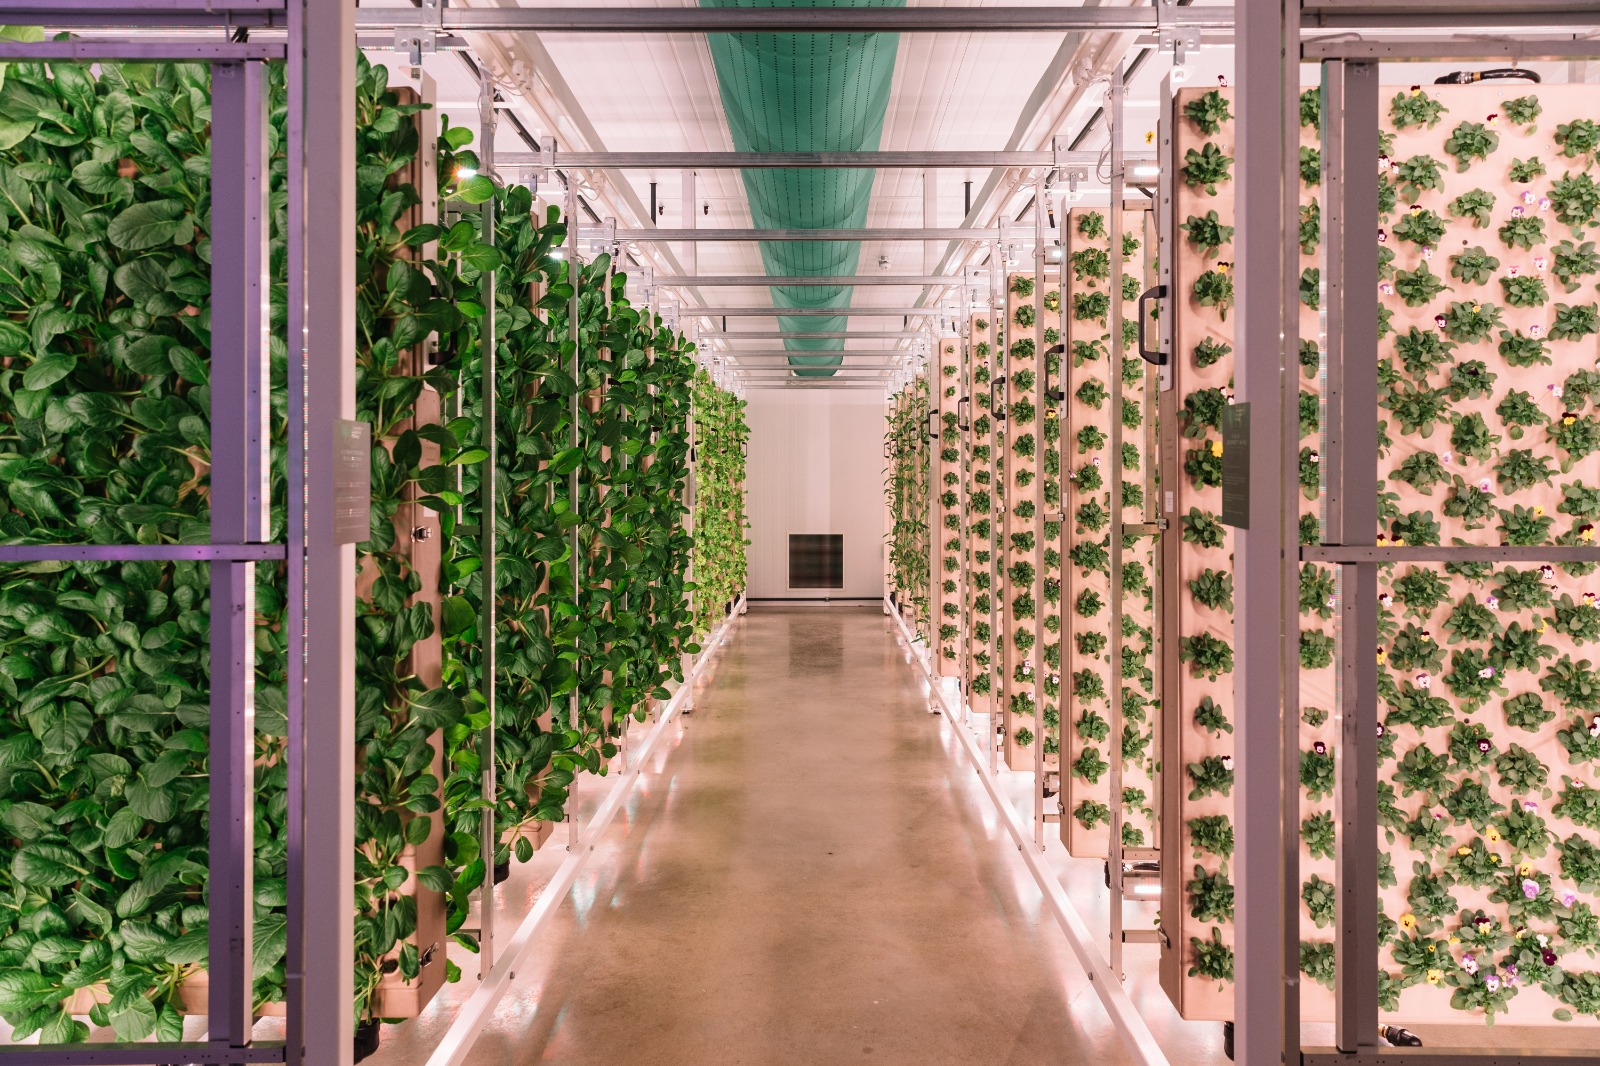 Innovation Agritech Group Launches Revolutionary New Vertical Farming Technology, the GrowFrame™ 360